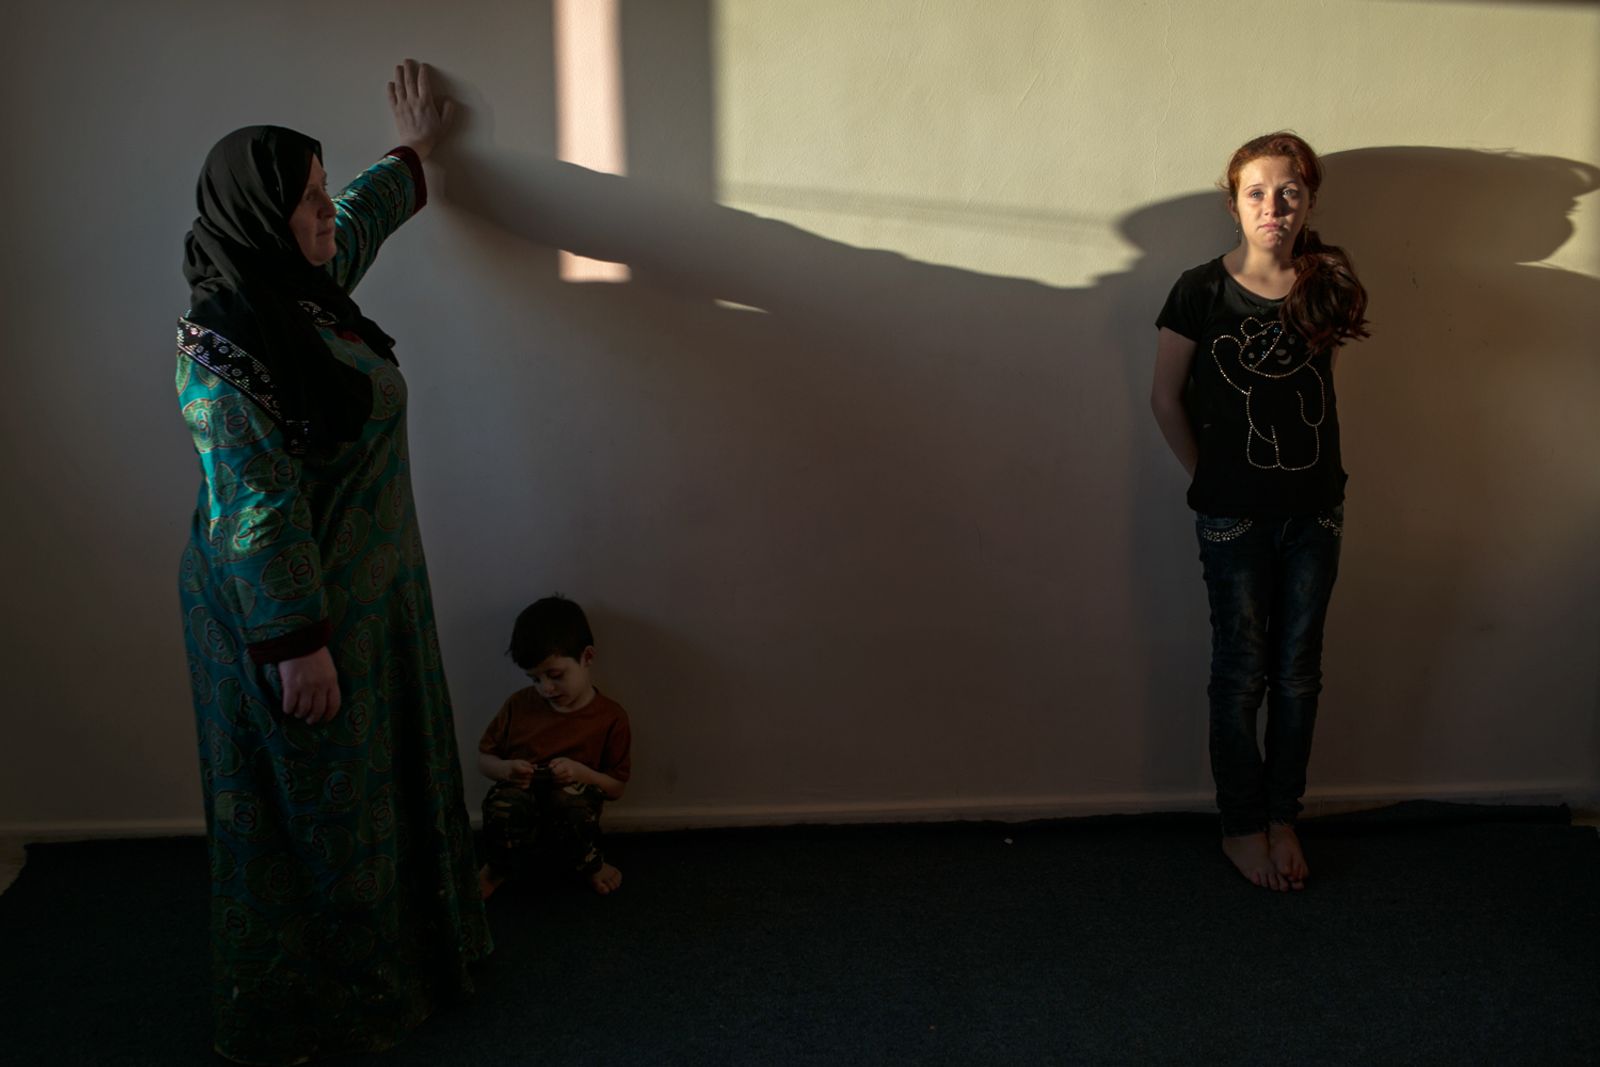 © Tanya Habjouqa - Syrian refugees in Jordan. A grandmother looks over her grandchildren. The girl lost her father.